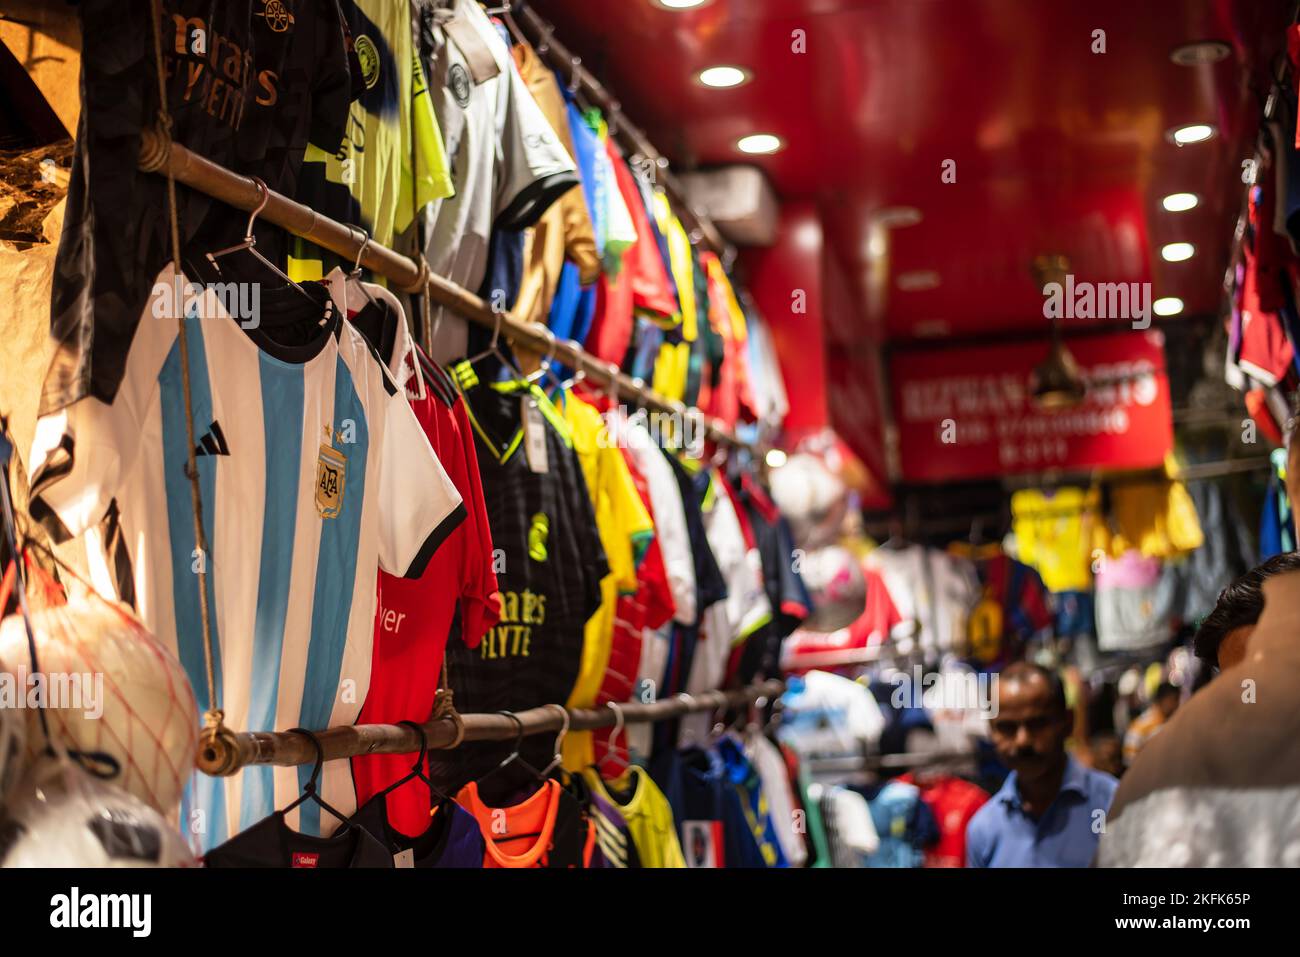 Calcutta, India - November 15, 2022. Soccer jerseys of various country are hanging in a retail shop to sell. Stock Photo